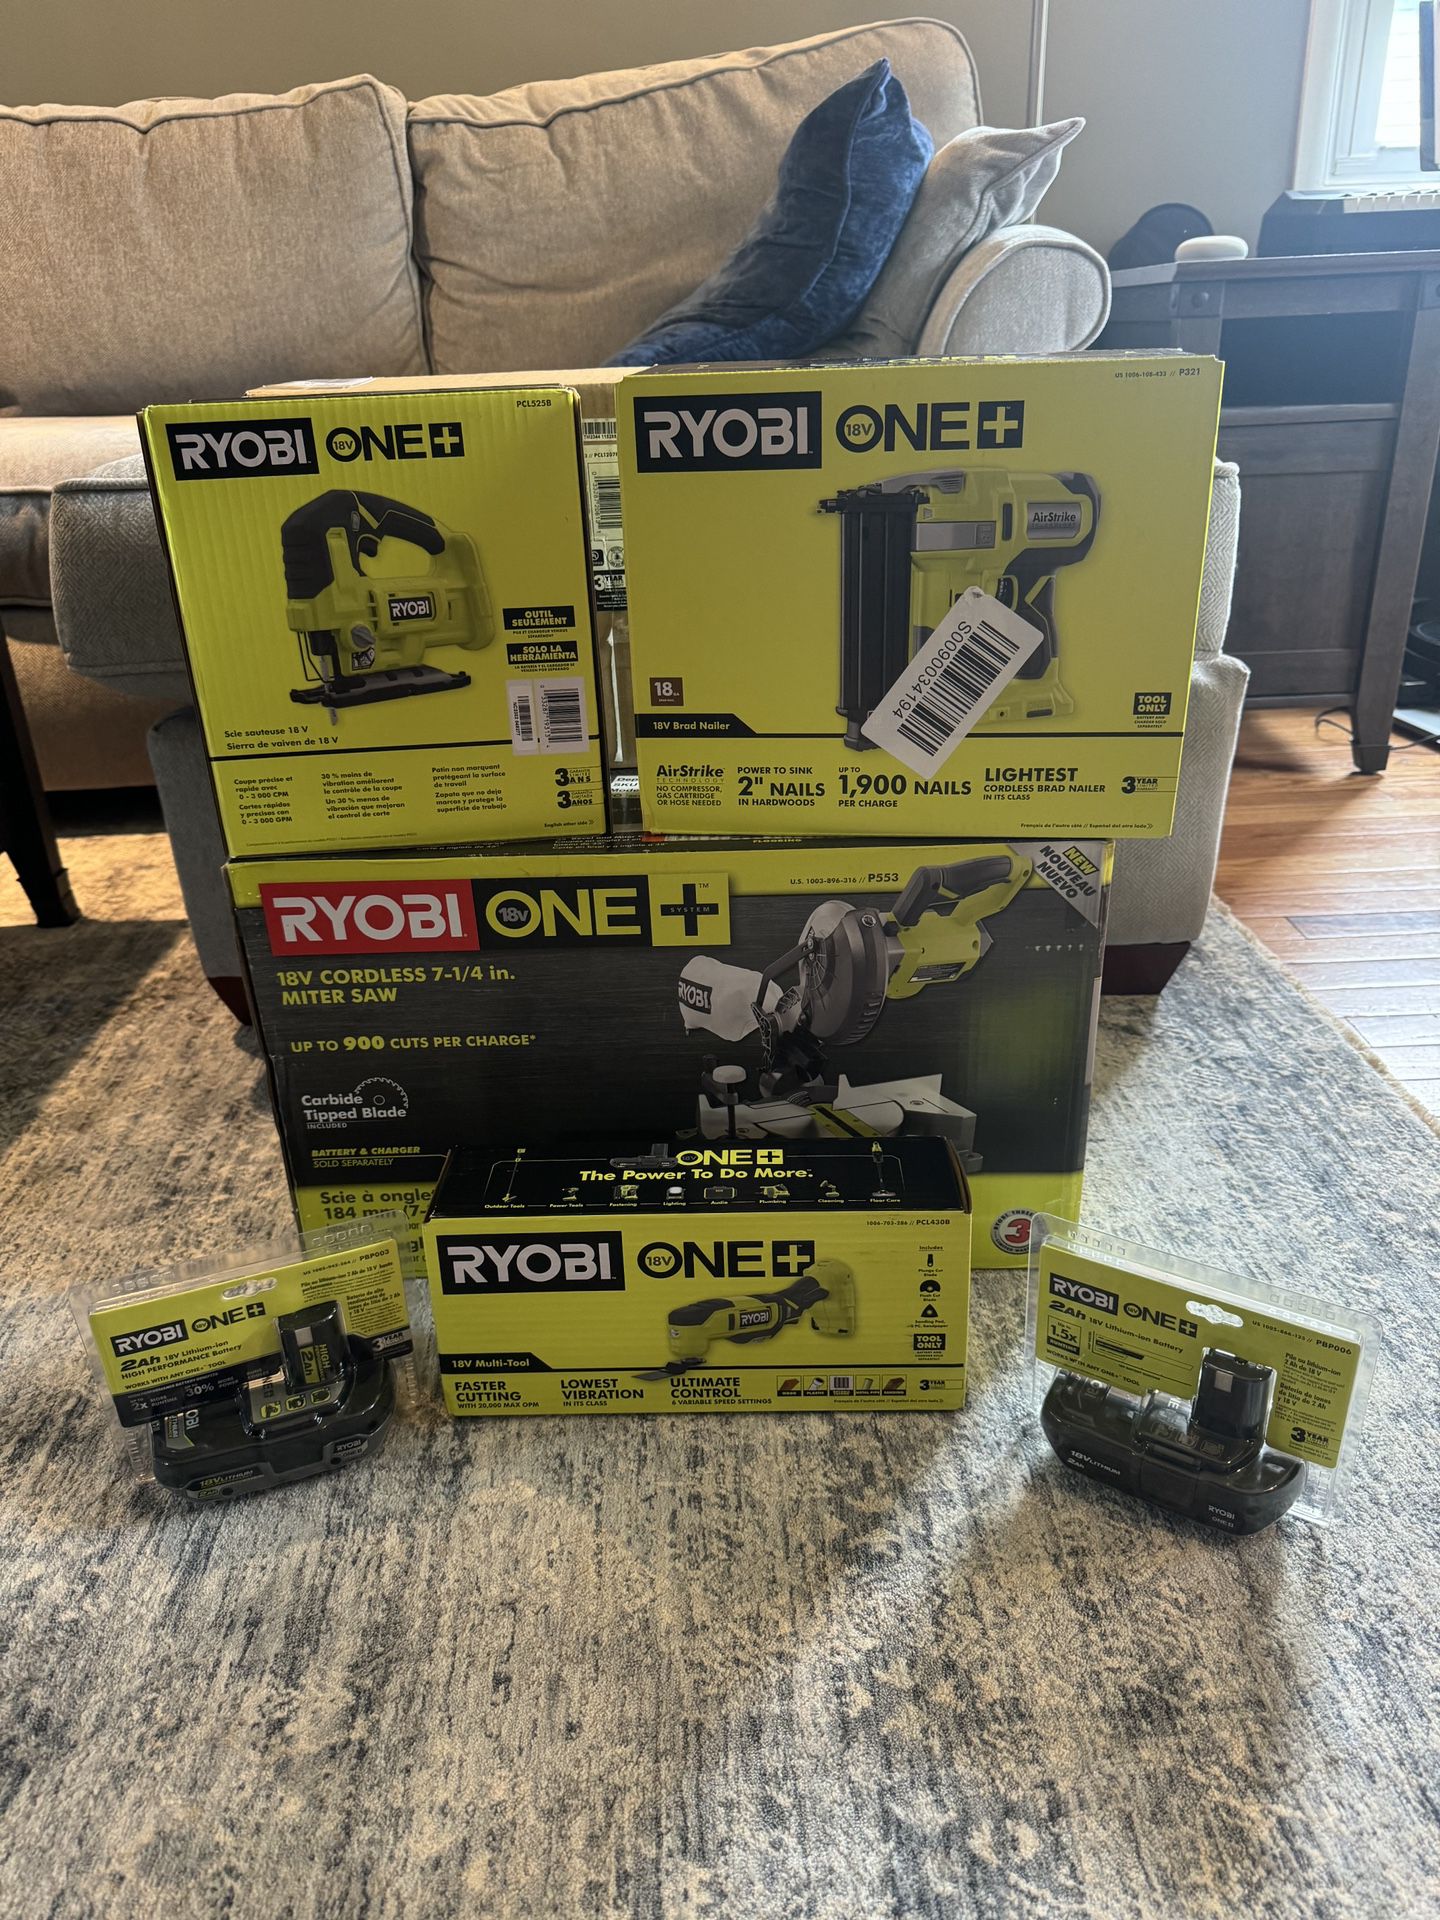 * NEW IN BOX * Ryobi One+ 18V Power Tools [nailers, multitools, miters, saws, sander, batteries] ($670 Retail Value)